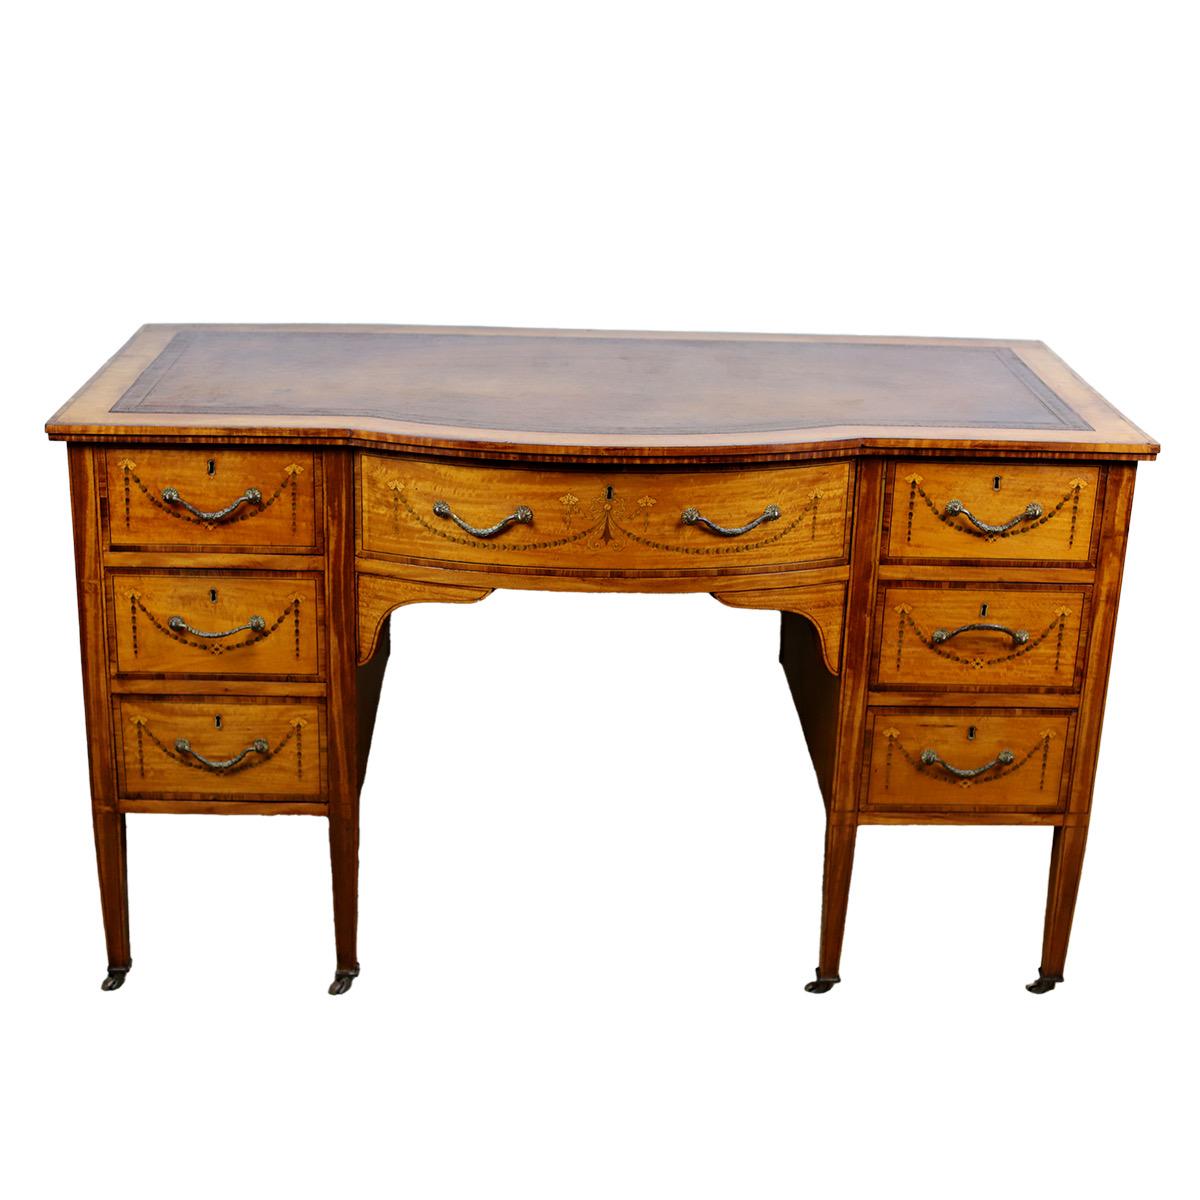 An Edwardian Neoclassical Revival satinwood desk. 
An Edwardian Neoclassical Revival satinwood desk, the inset tooled leather writing surface above seven drawers inlaid with bellflower swags. This is beautifully made and is of amazing quality
An